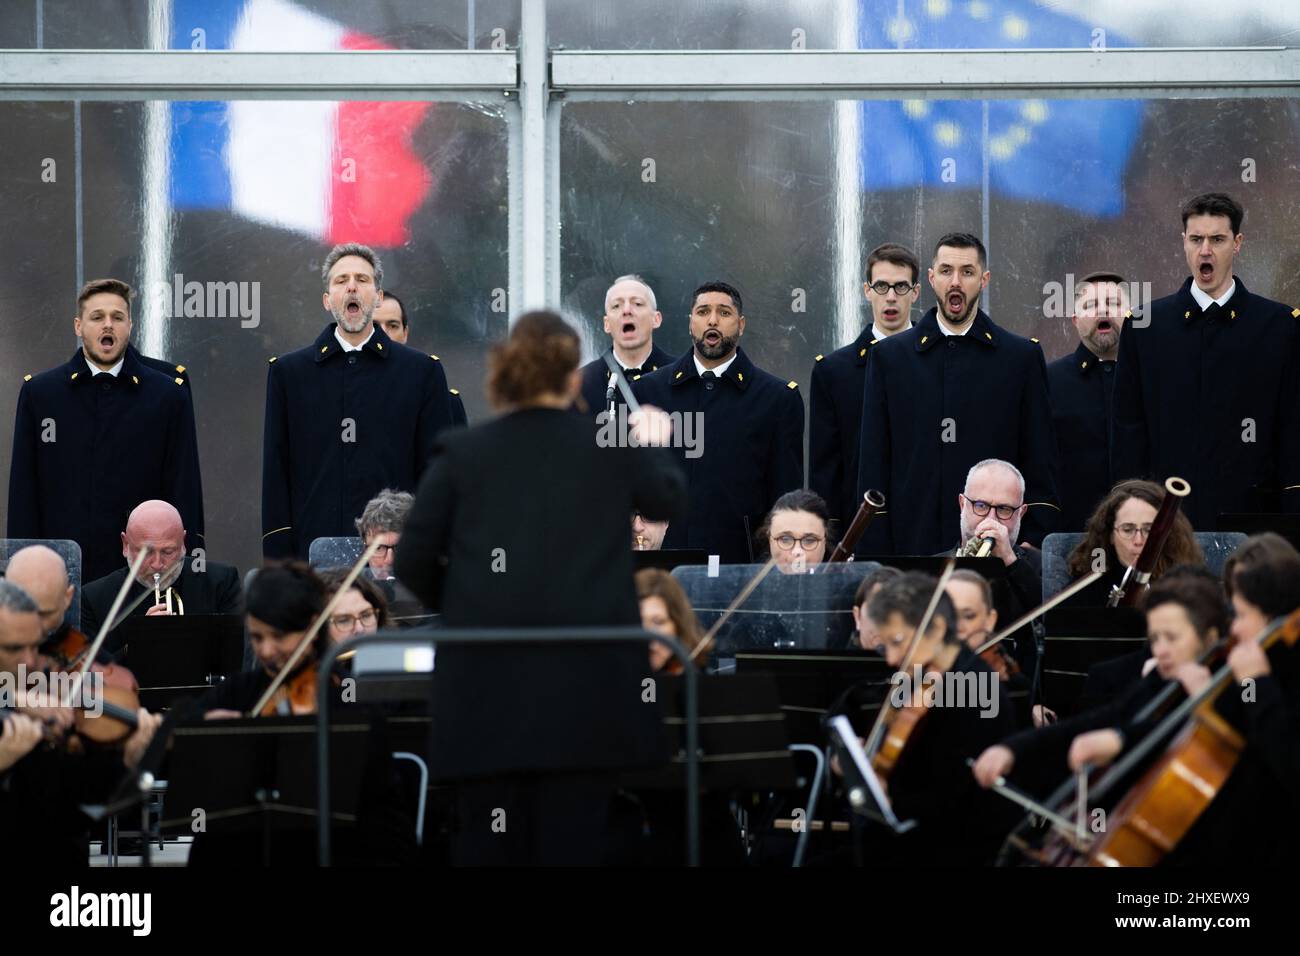 Ceremony for the national and European day in tribute to the victims of terrorism at the Grand Trianon in Versailles, France on March 11, 2022. The date of March 11, chosen by the European Union as the date of joint commemoration, refers to the attack committed at the Atocha train station in Madrid on March 11, 2004. Photo by Jeanne Accorsini/Pool/ABACAPRESS.COM Stock Photo